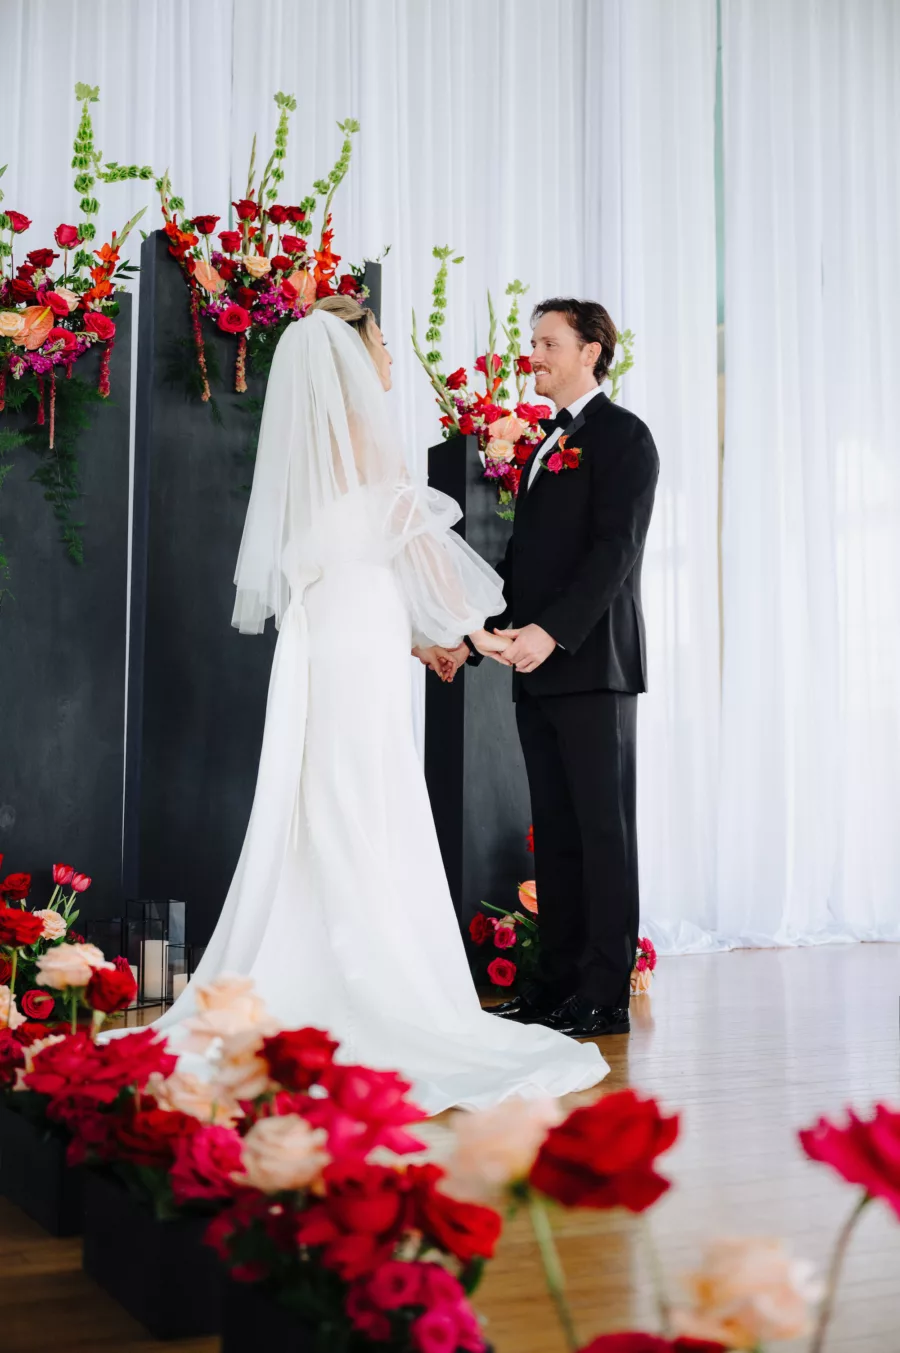 Bride and Groom Private Vow Reading Wedding Portrait | Tampa Bay Content Creator Behind The Vows | Ybor Photographer McNeile Photography | DJ Graingertainment